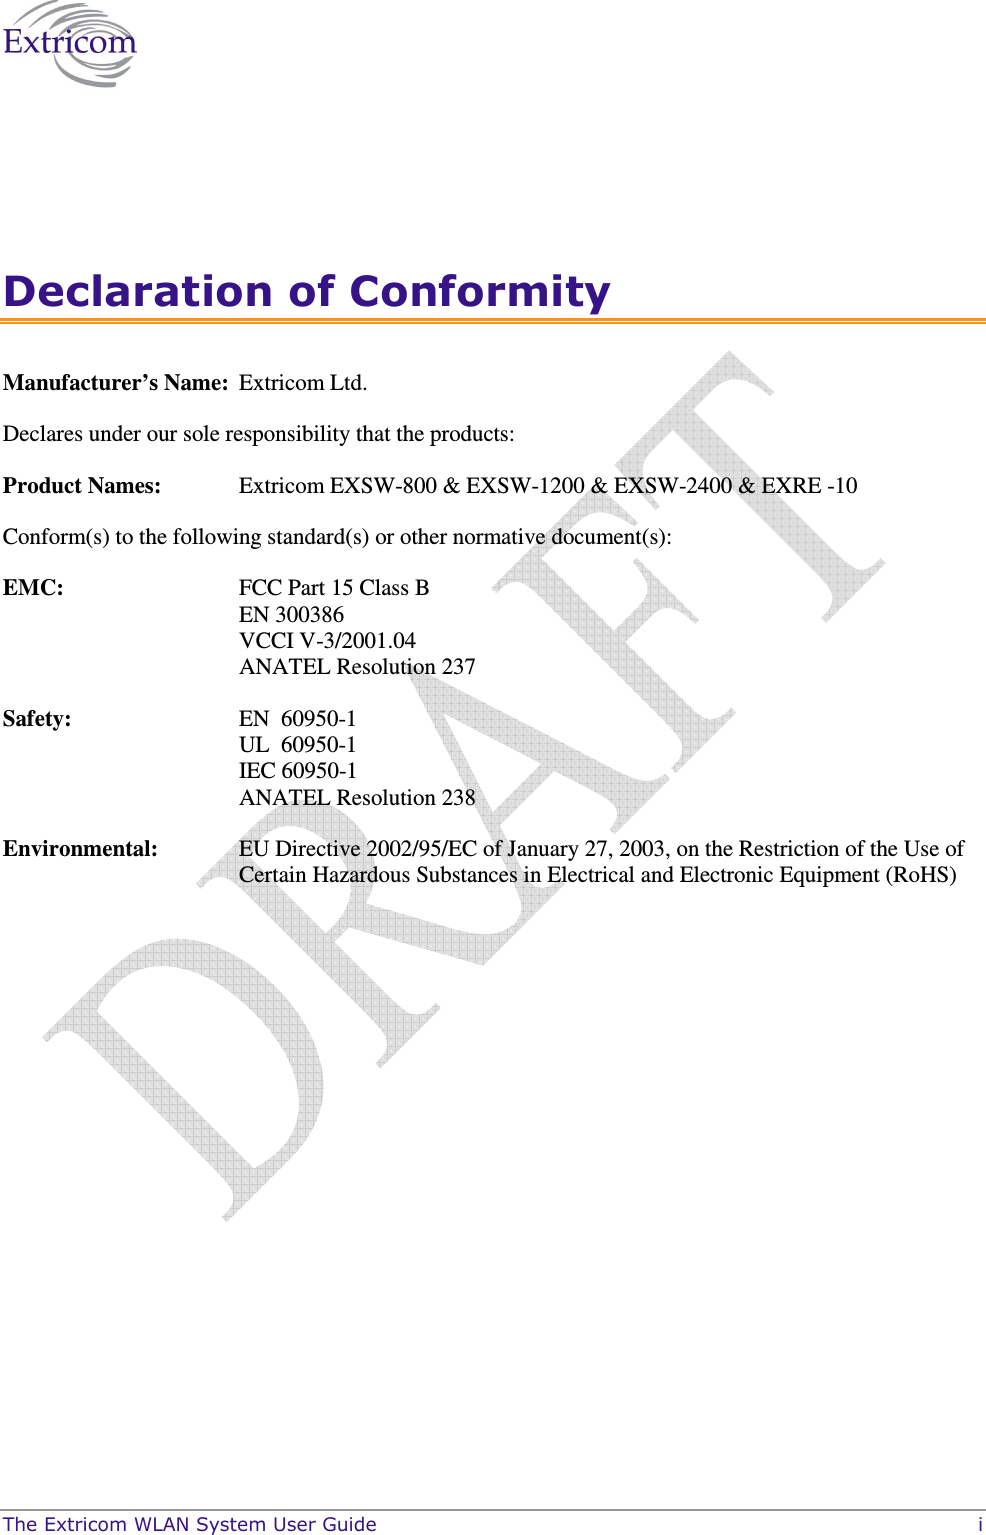  The Extricom WLAN System User Guide    i Declaration of Conformity Manufacturer’s Name:  Extricom Ltd.  Declares under our sole responsibility that the products: Product Names:  Extricom EXSW-800 &amp; EXSW-1200 &amp; EXSW-2400 &amp; EXRE -10 Conform(s) to the following standard(s) or other normative document(s):  EMC:   FCC Part 15 Class B EN 300386 VCCI V-3/2001.04 ANATEL Resolution 237 Safety:  EN  60950-1 UL  60950-1 IEC 60950-1 ANATEL Resolution 238 Environmental:   EU Directive 2002/95/EC of January 27, 2003, on the Restriction of the Use of Certain Hazardous Substances in Electrical and Electronic Equipment (RoHS)  